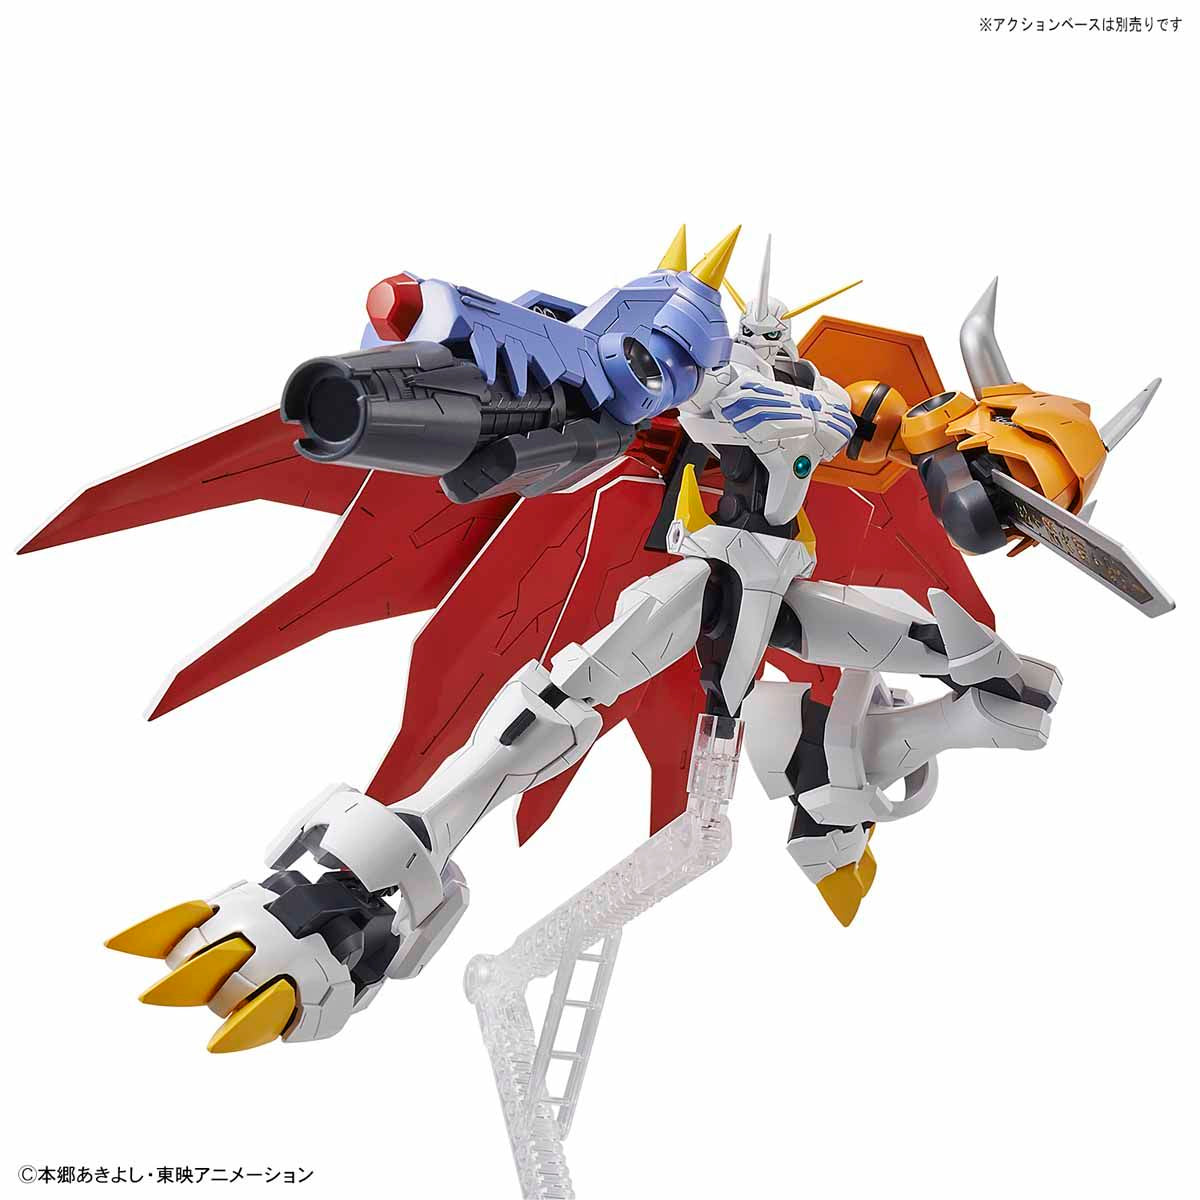 Digimon - Omnimon X - Figure-rise Standard Amplified Model Kit, X-antibody version designed by As'Maria, compatible with existing Amplified products, Nippon Figures